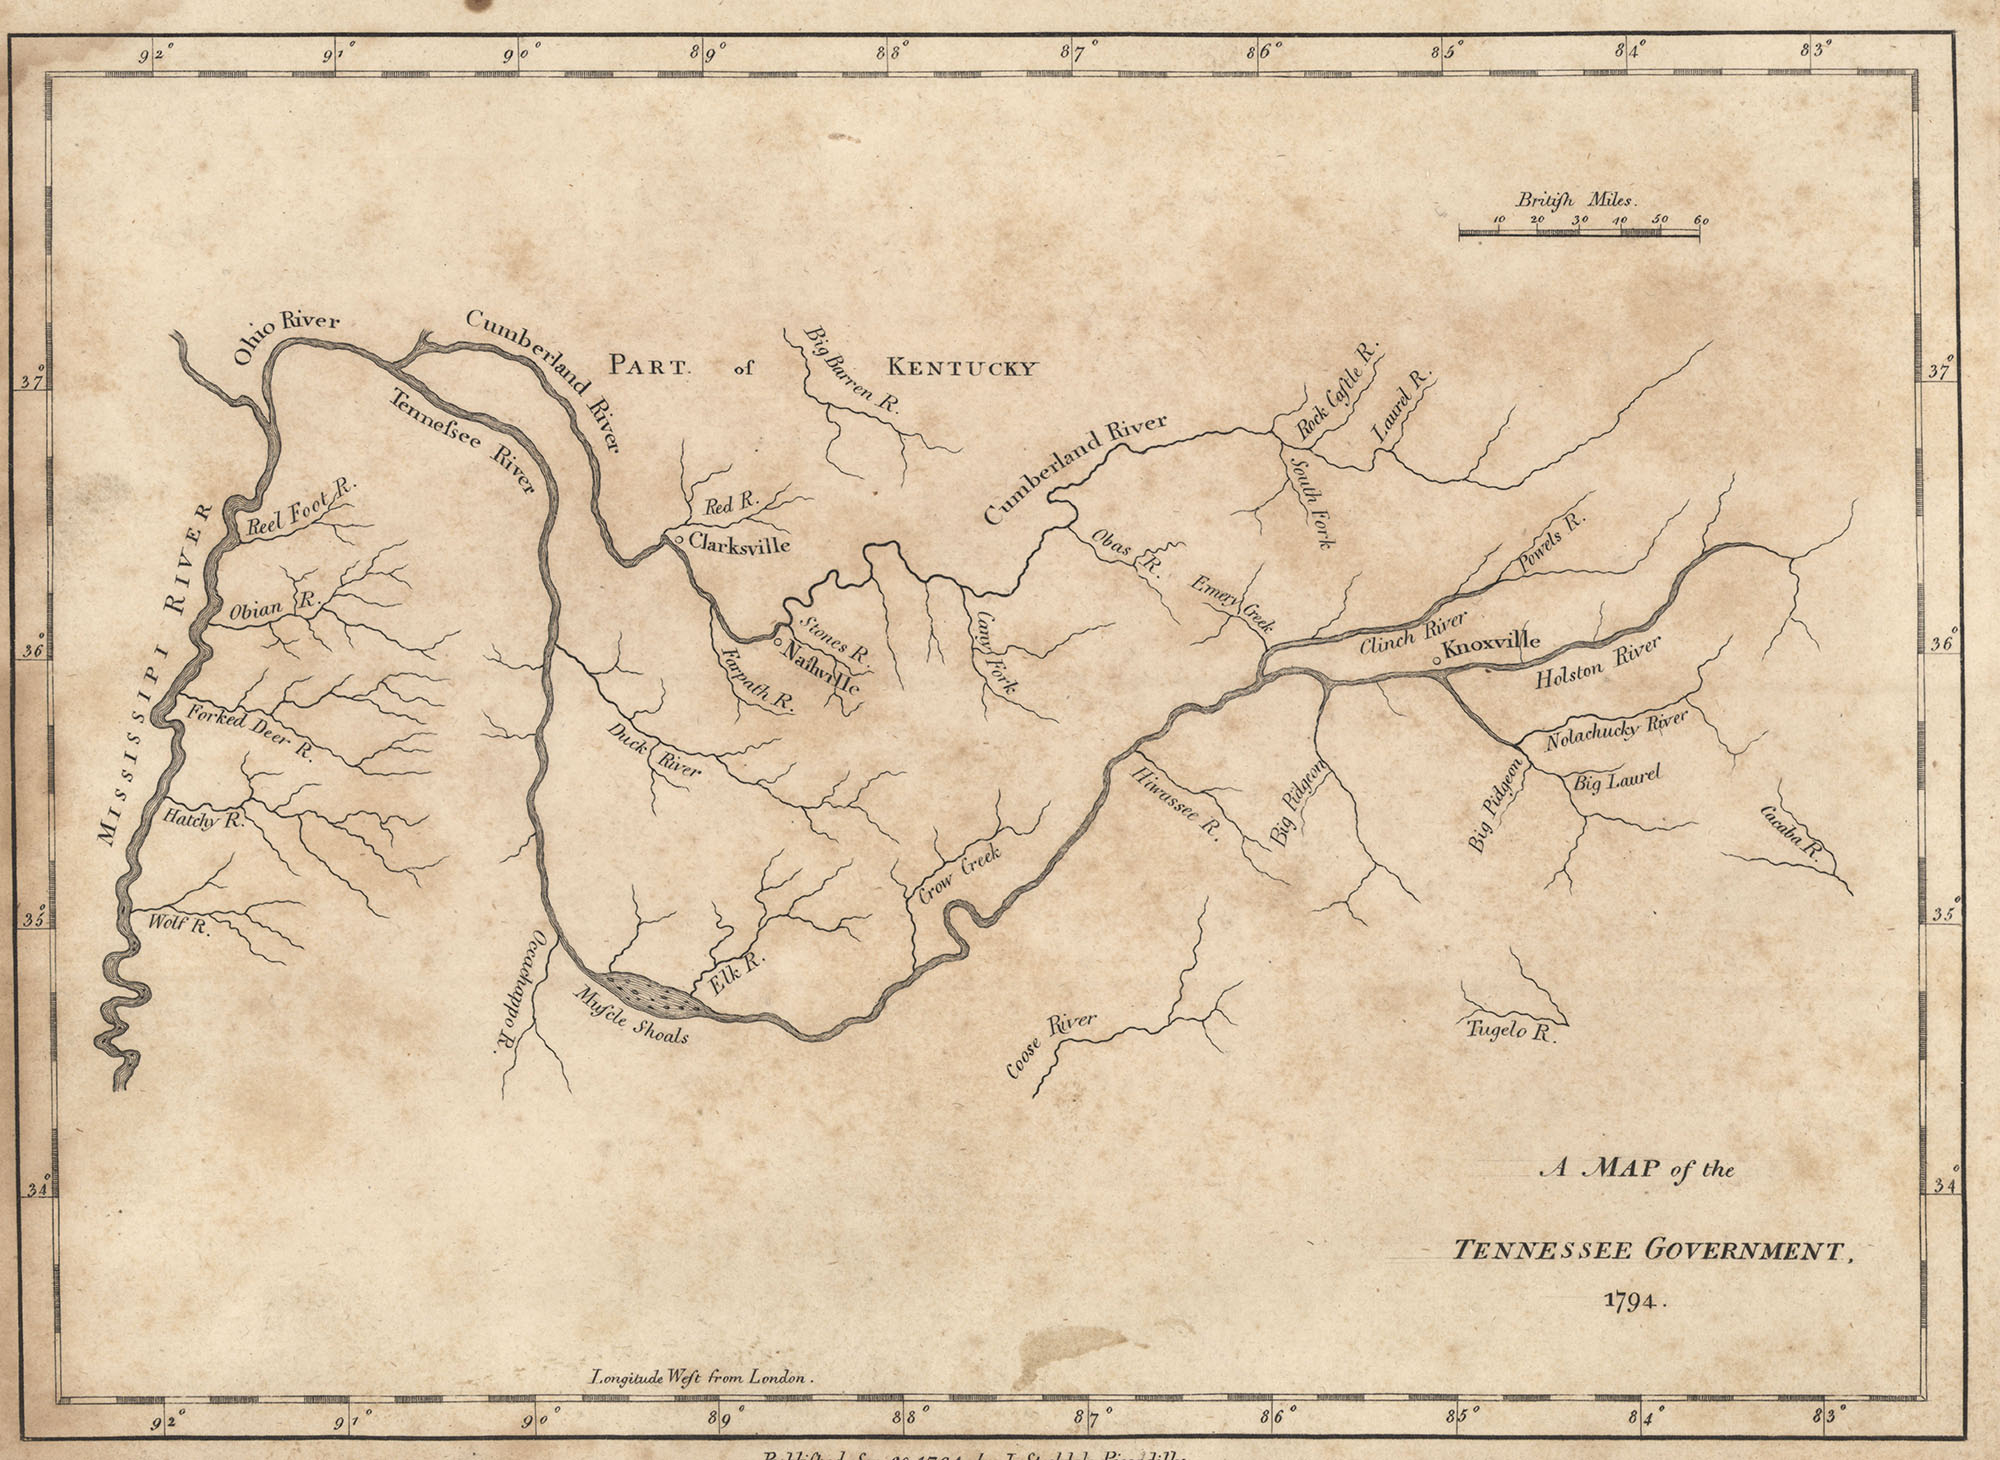 Early map showing the Mississippi, Tennessee, and Cumberland River systems